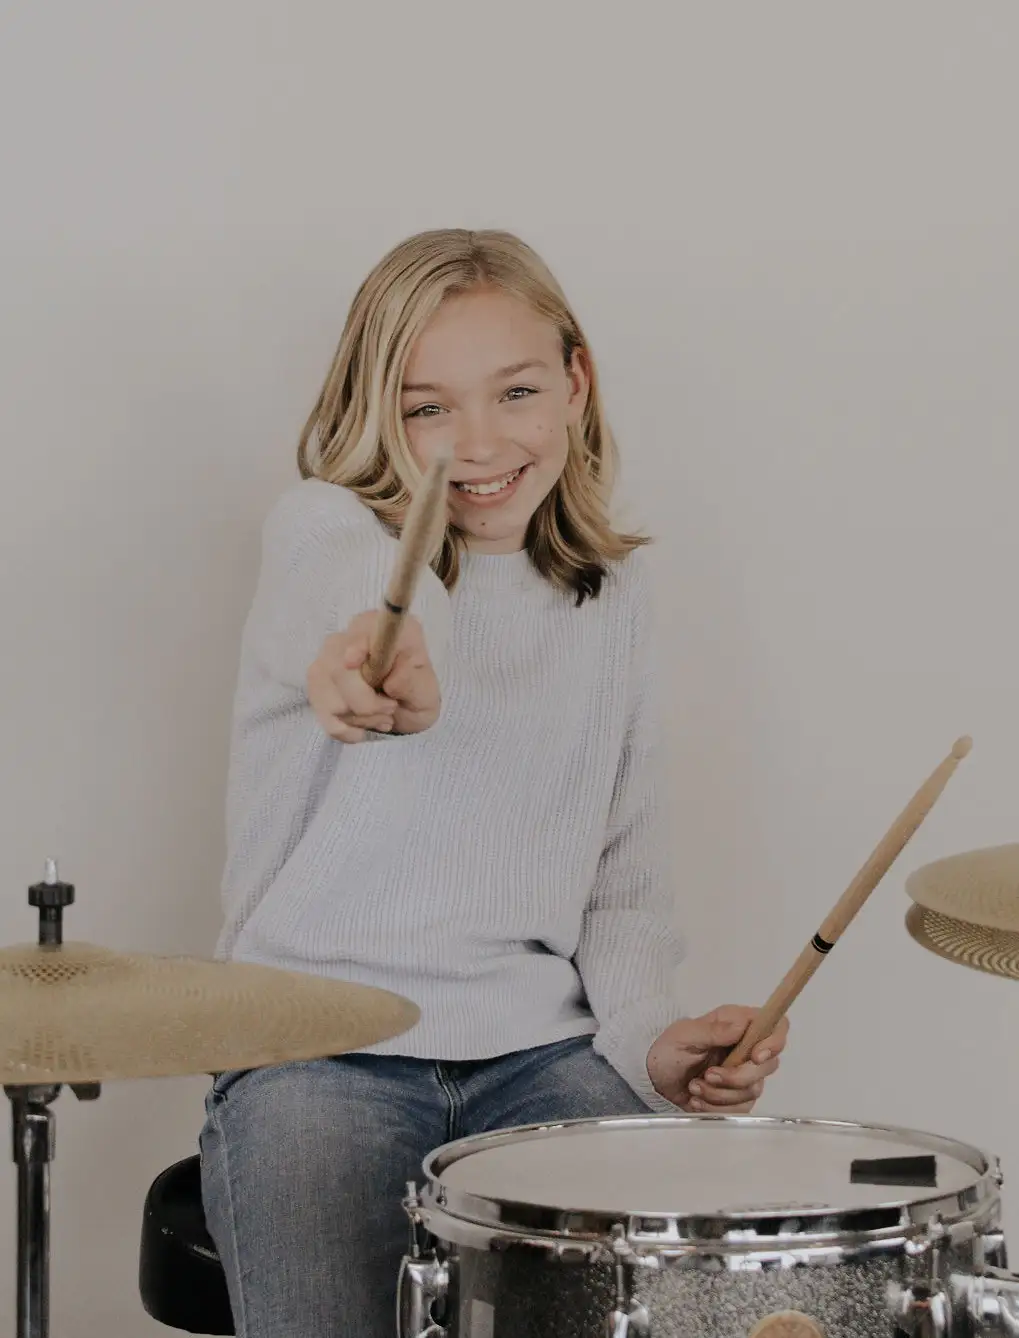 Girl playing drums